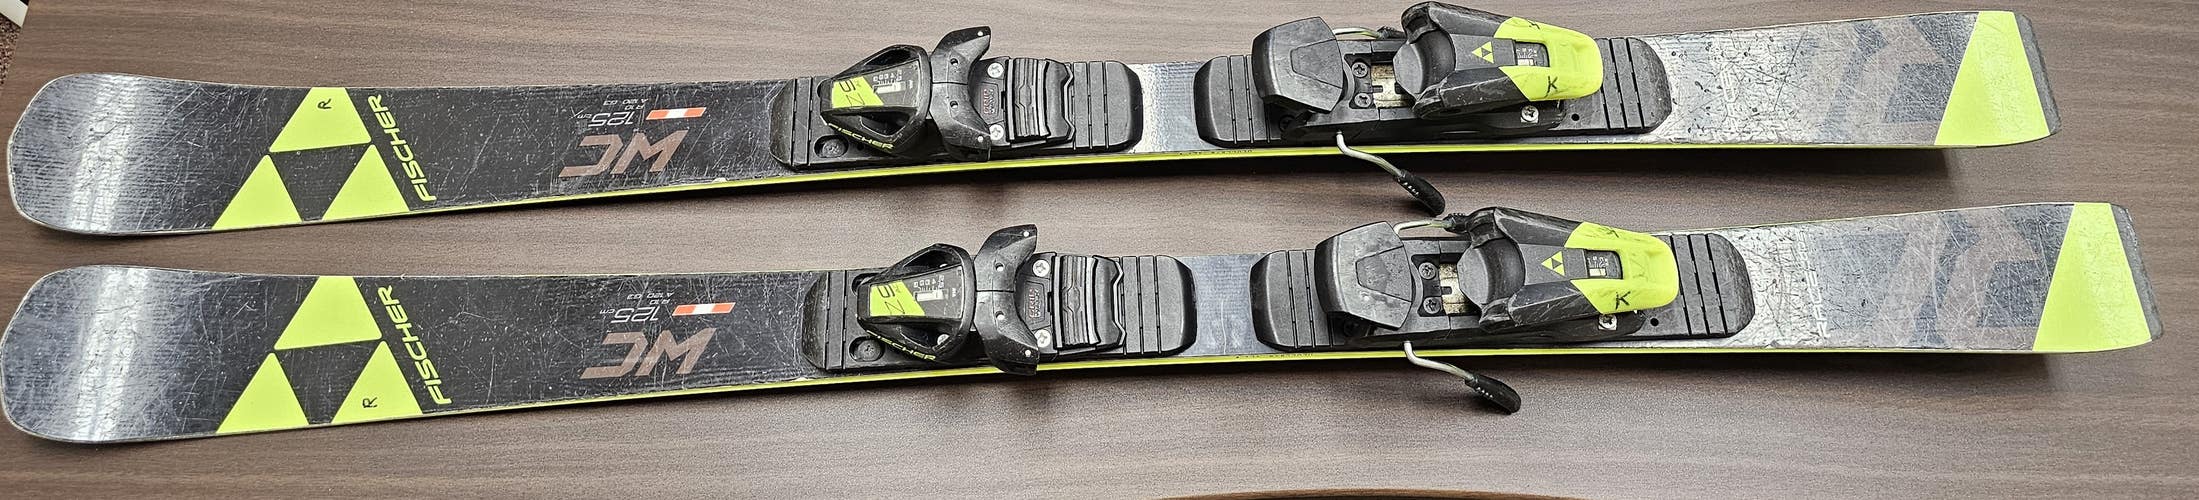 Fischer WC Pro Multi Event 125 cm Racing Skis With Bindings